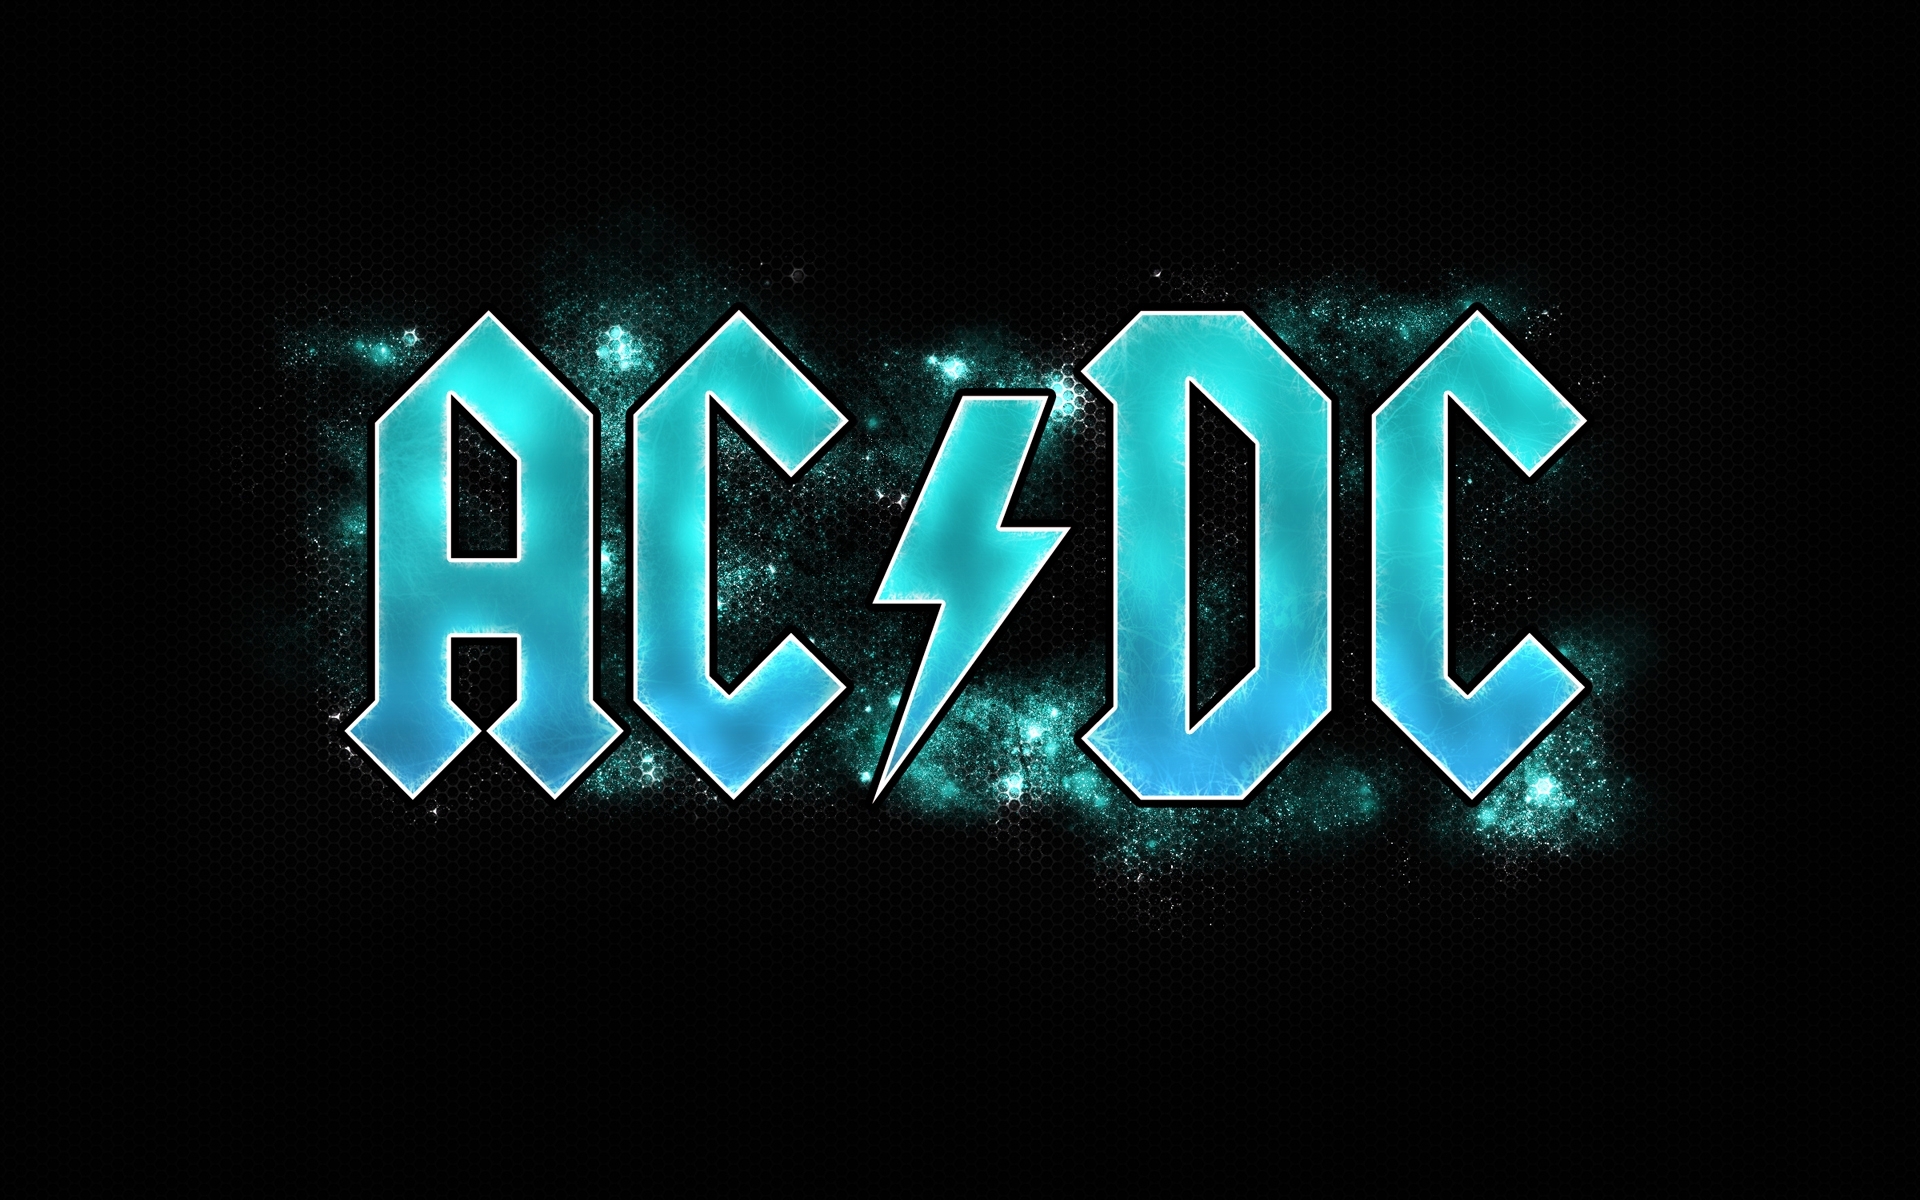 ac dc, Ac, Dc, Acdc, Heavy, Metal, Hard, Rock, Classic, Bands, Groups, Entertainment, Men, People, Male, Concert Wallpaper